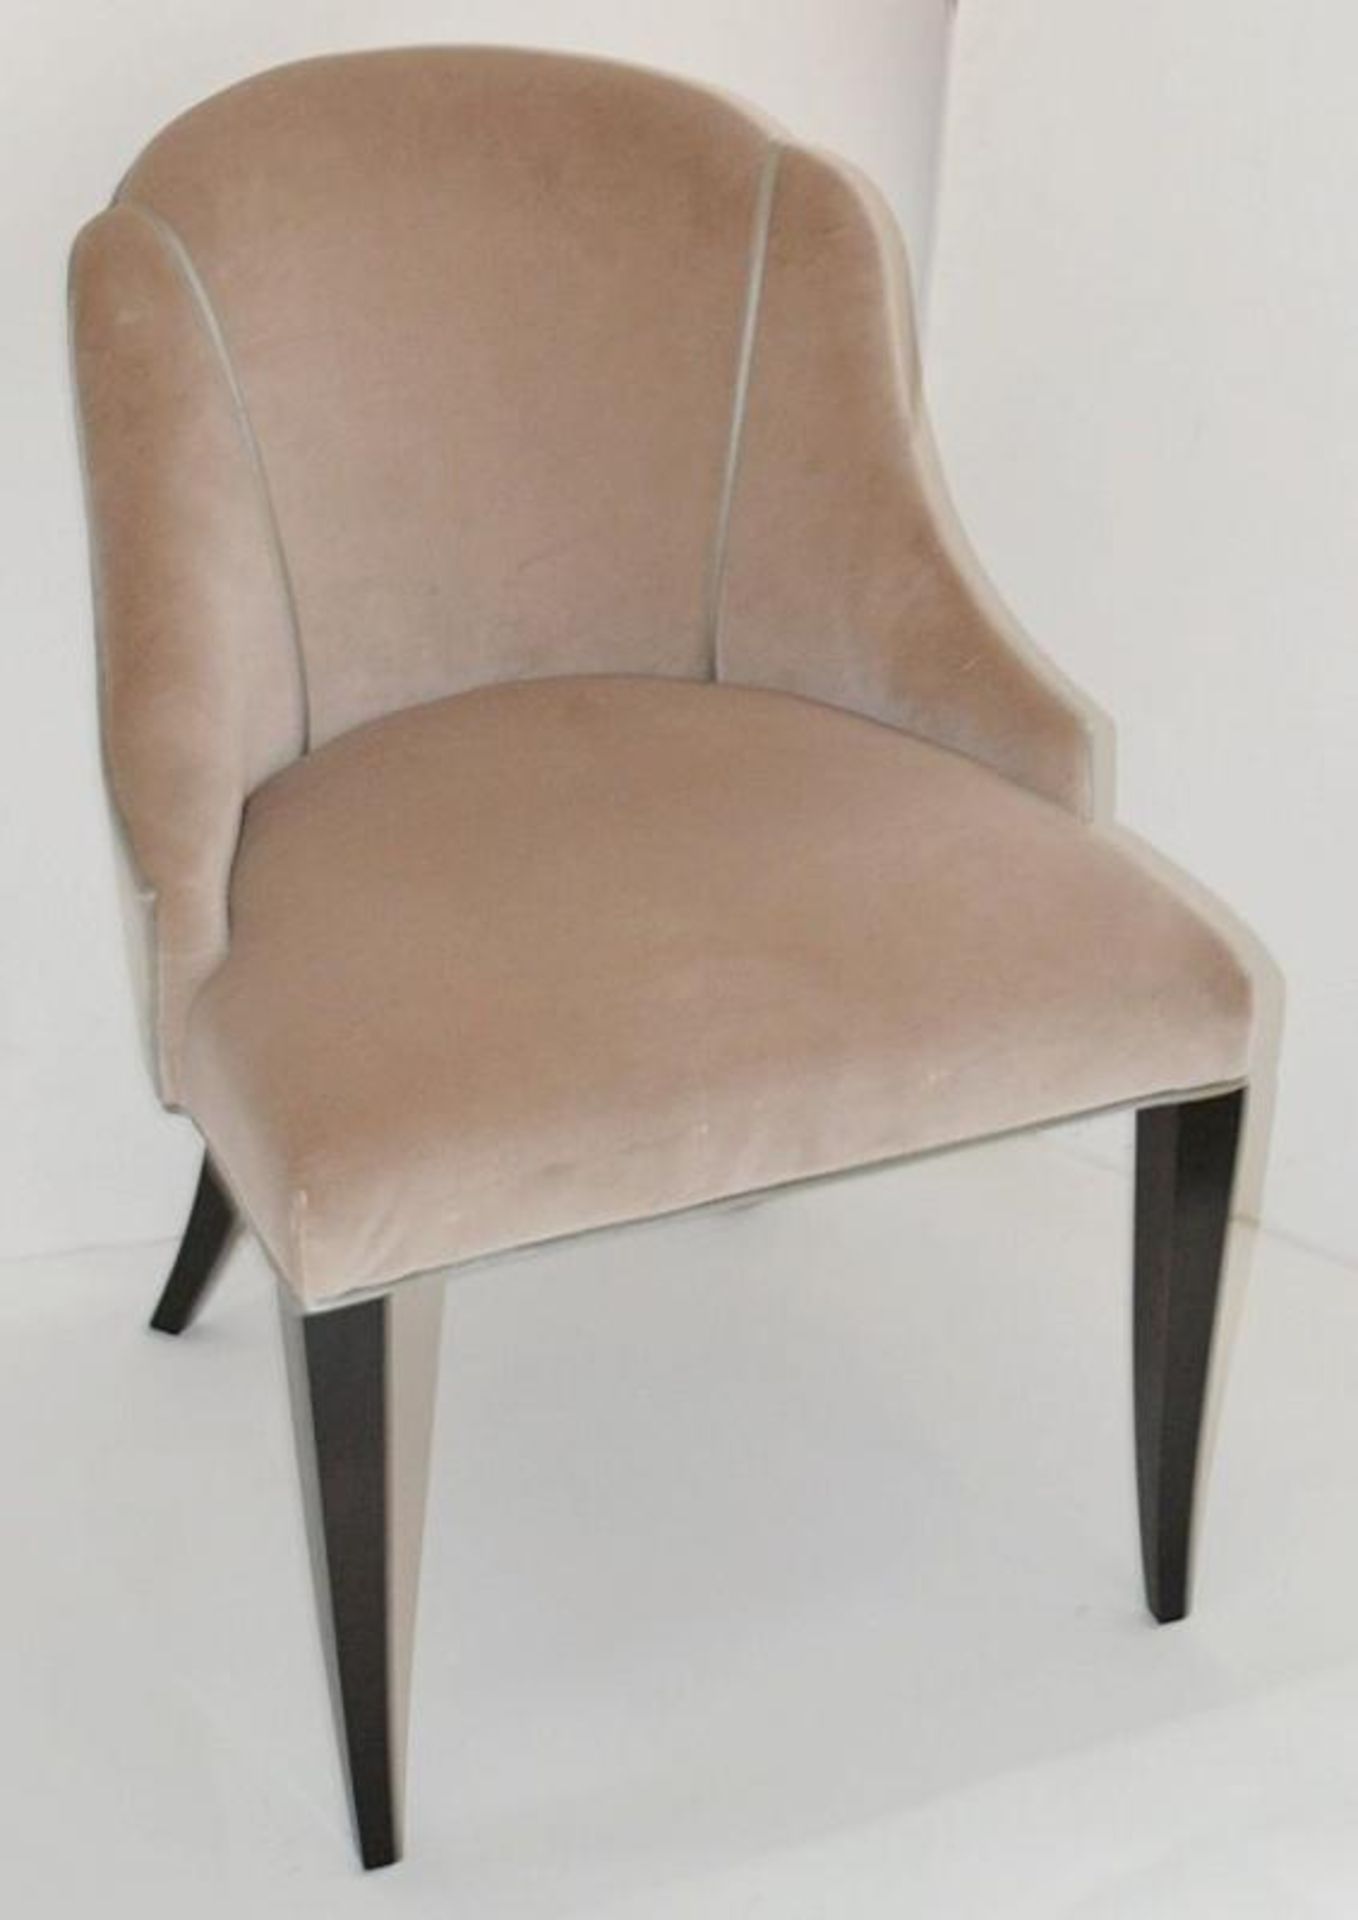 1 x REED &amp; RACKSTRAW "Cloud" Handcrafted Velvet Upholstered Chair - Dimensions: H87 x W58 x D5 - Image 9 of 14